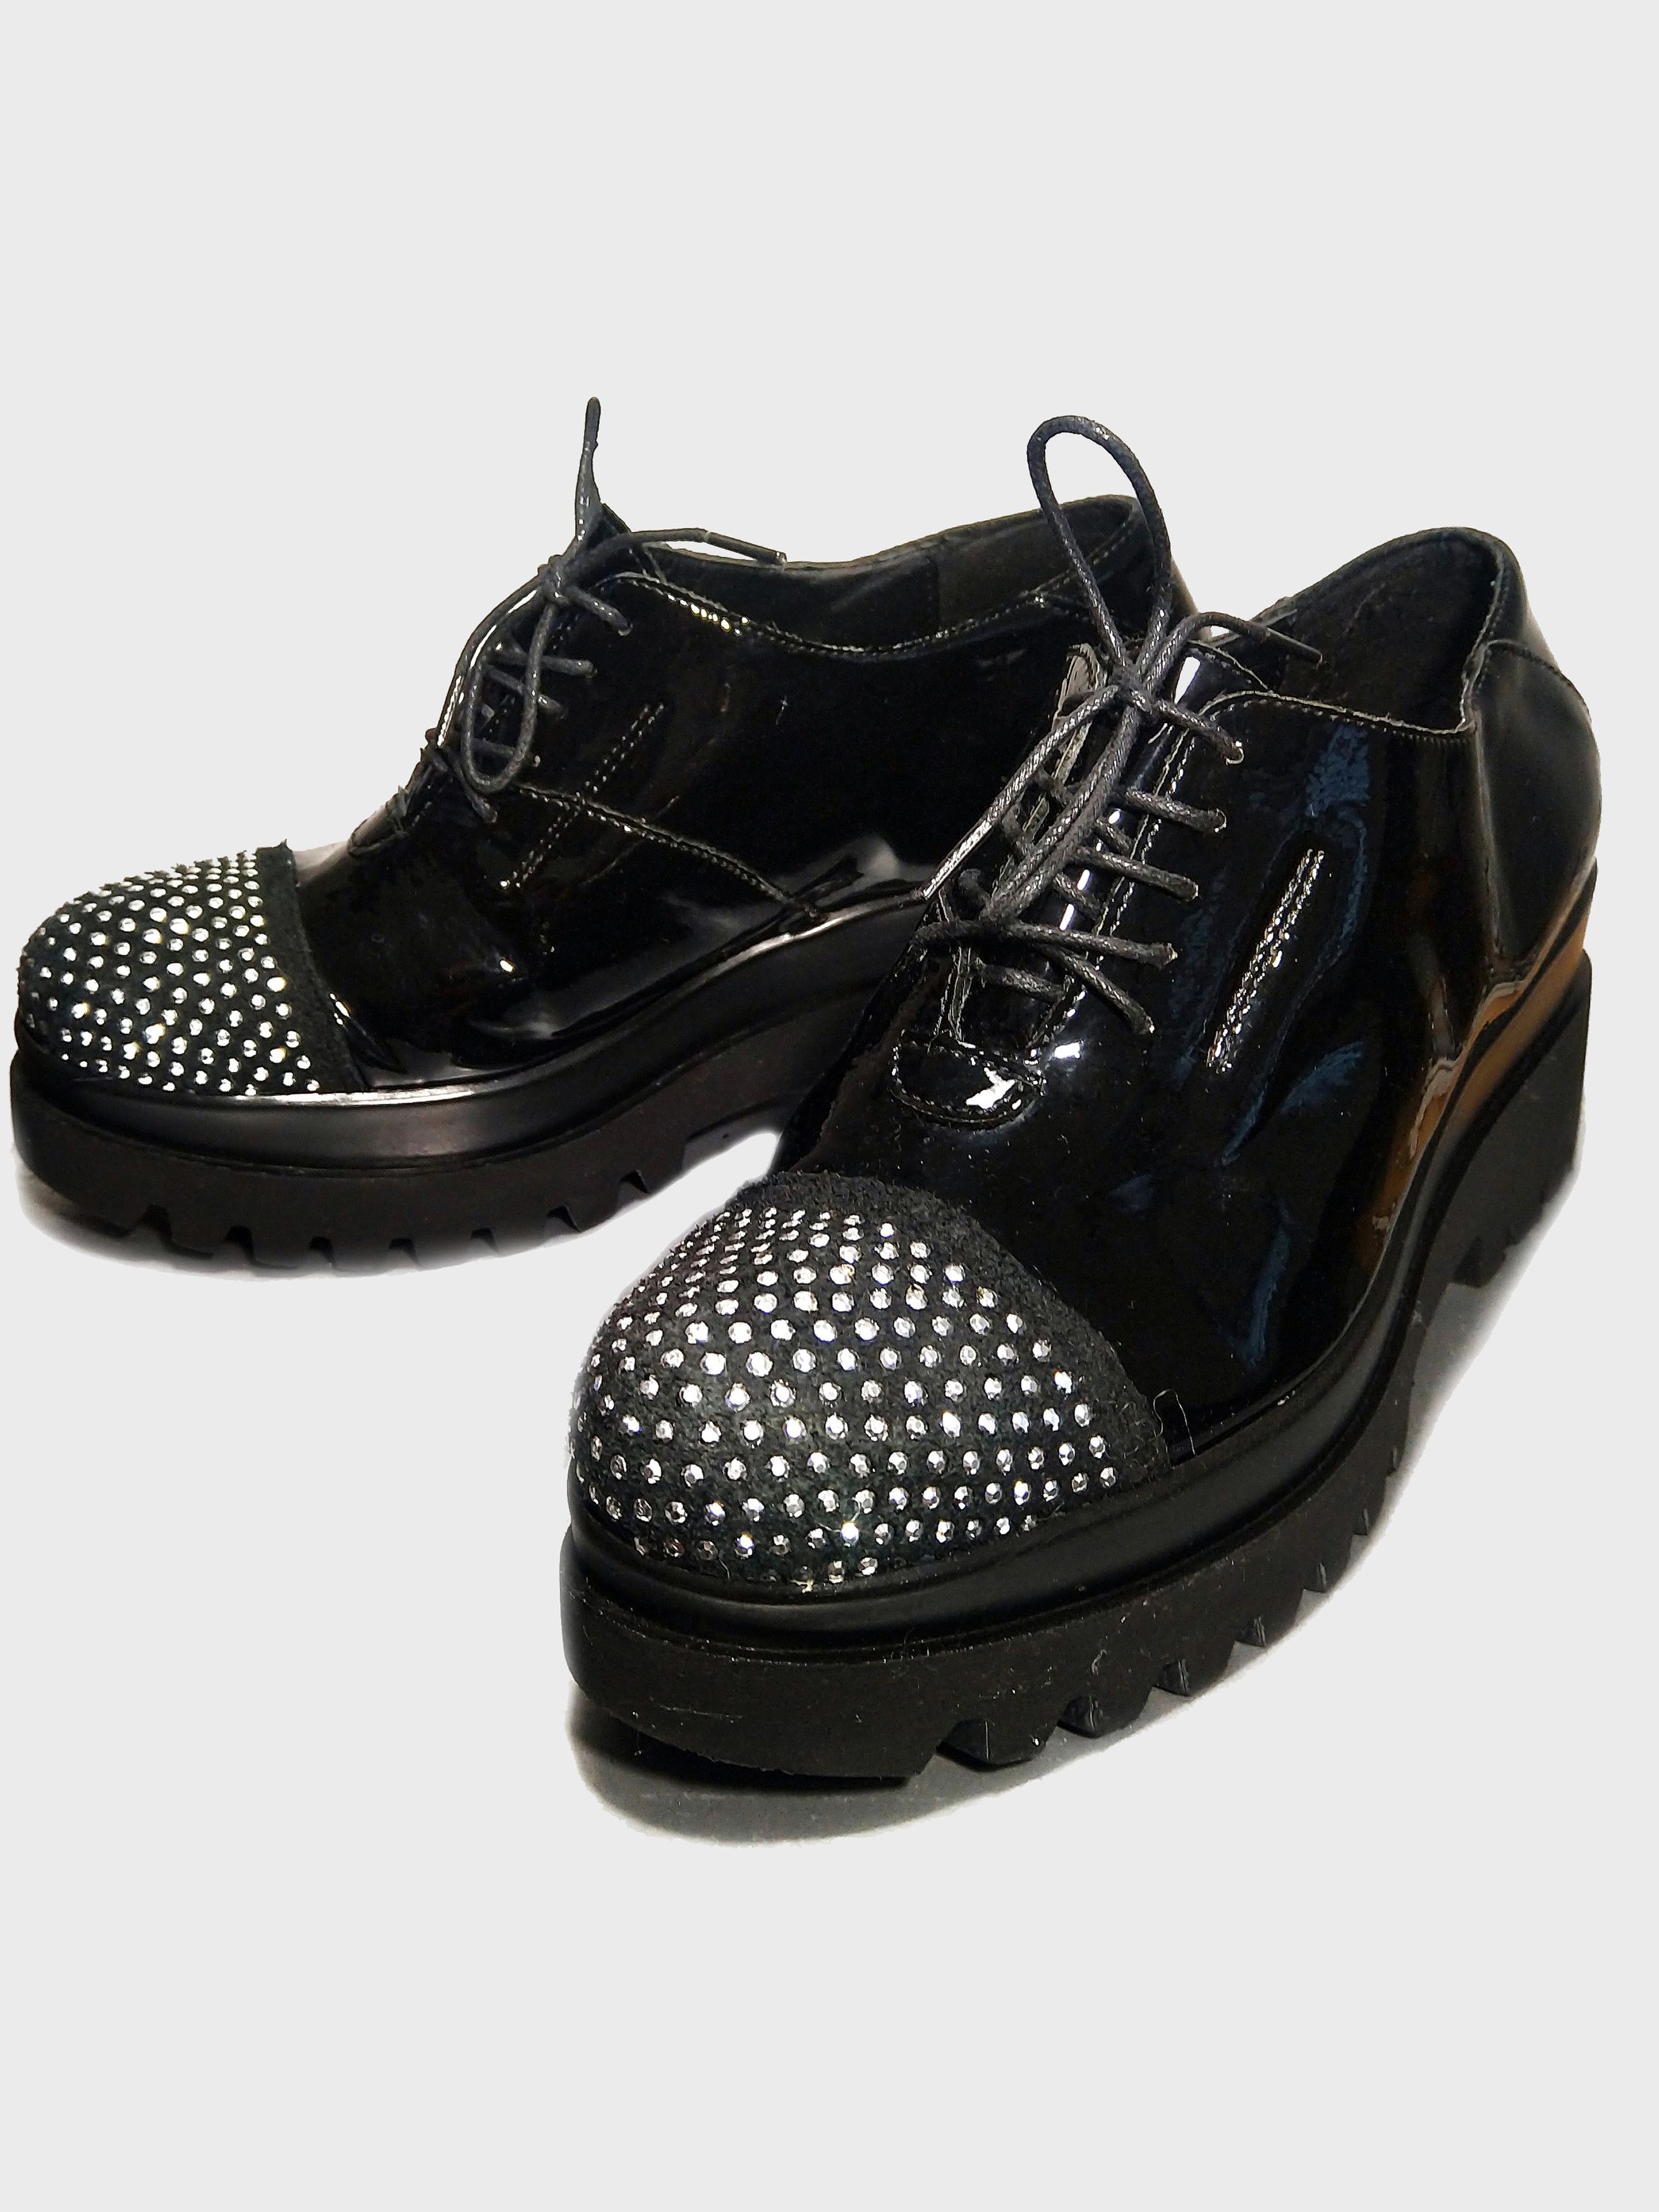 Vera Pelle Cw chewing black patent Italian leather low shoes Size US 8 / IT 38 - 4 Thumbnail